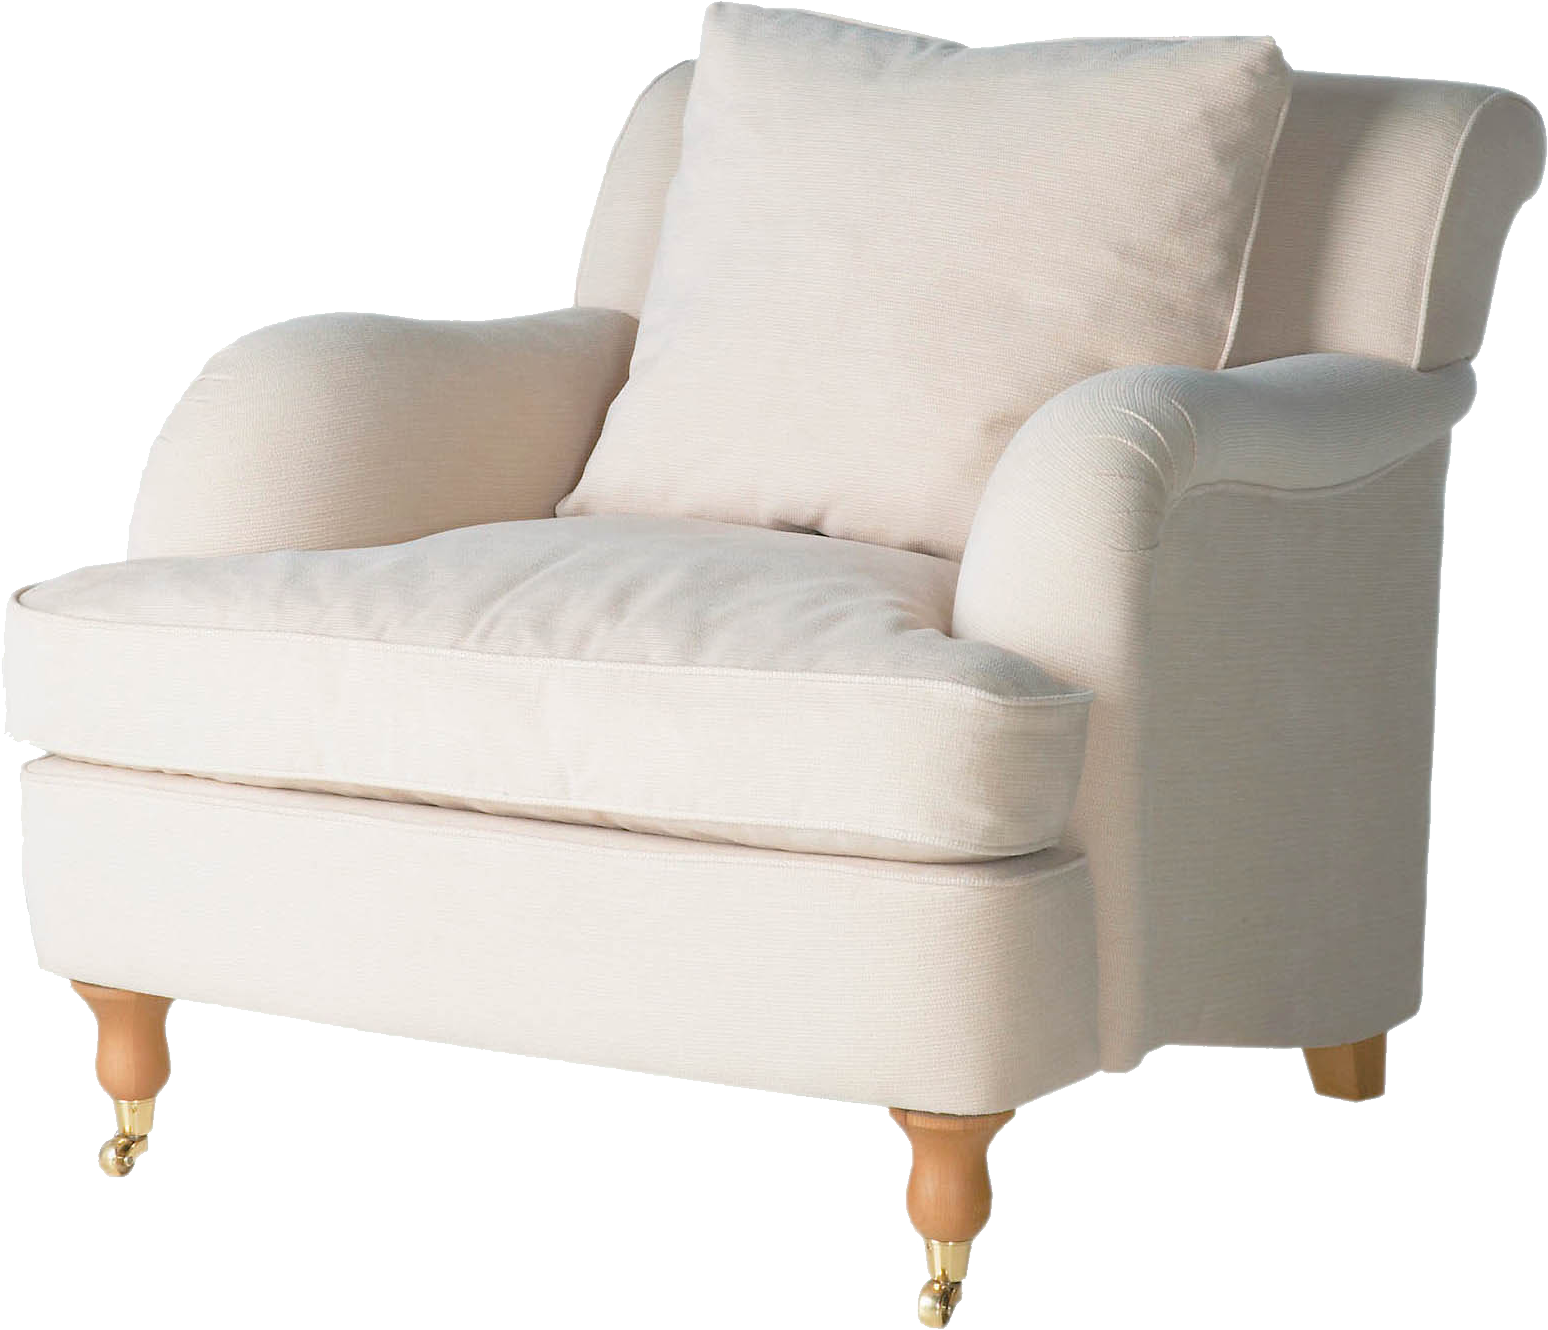 Furniture clipart comfy chair, Furniture comfy chair Transparent FREE